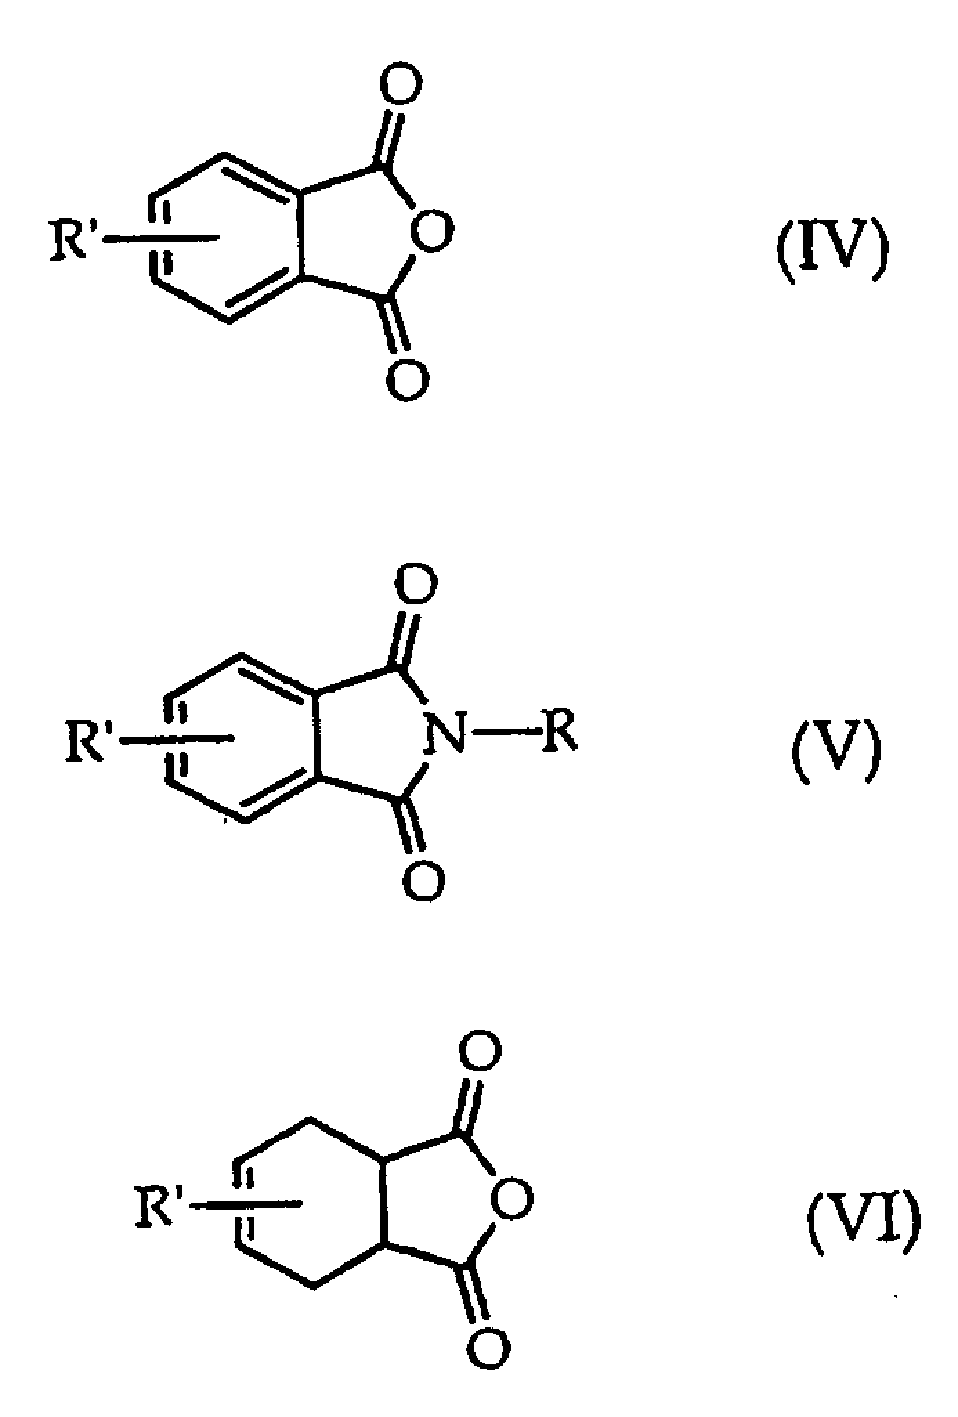 Preparation of substituted phthalic anhydride, especially 4-chlorophthalic anhydride